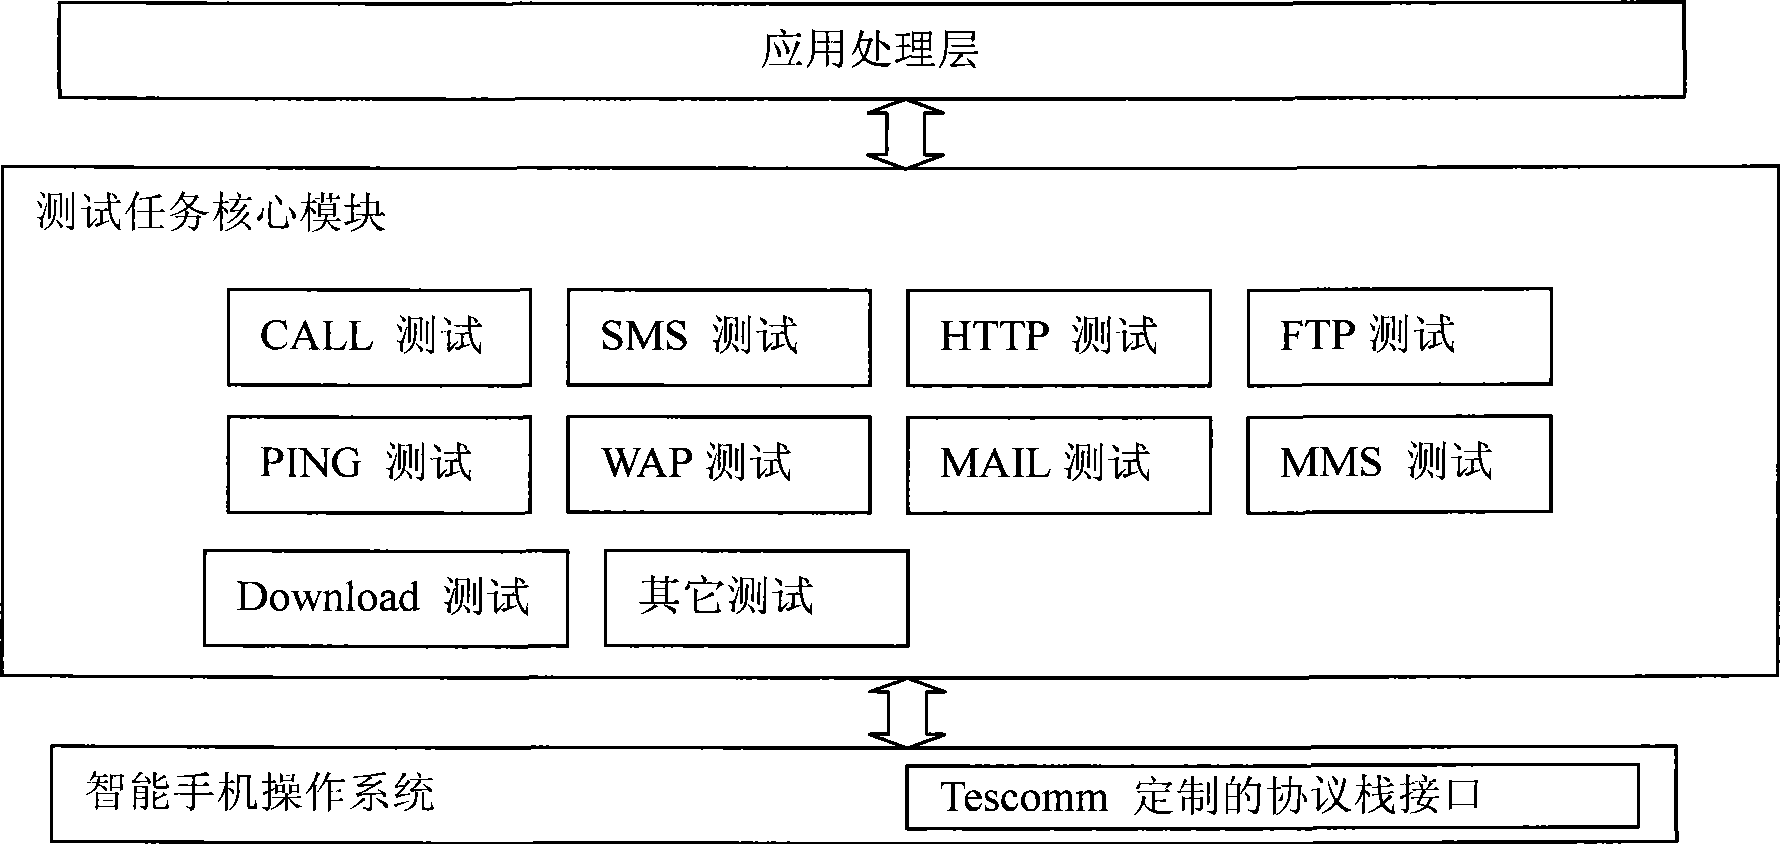 Network optimization processing system and method based on smart phone protocol stack